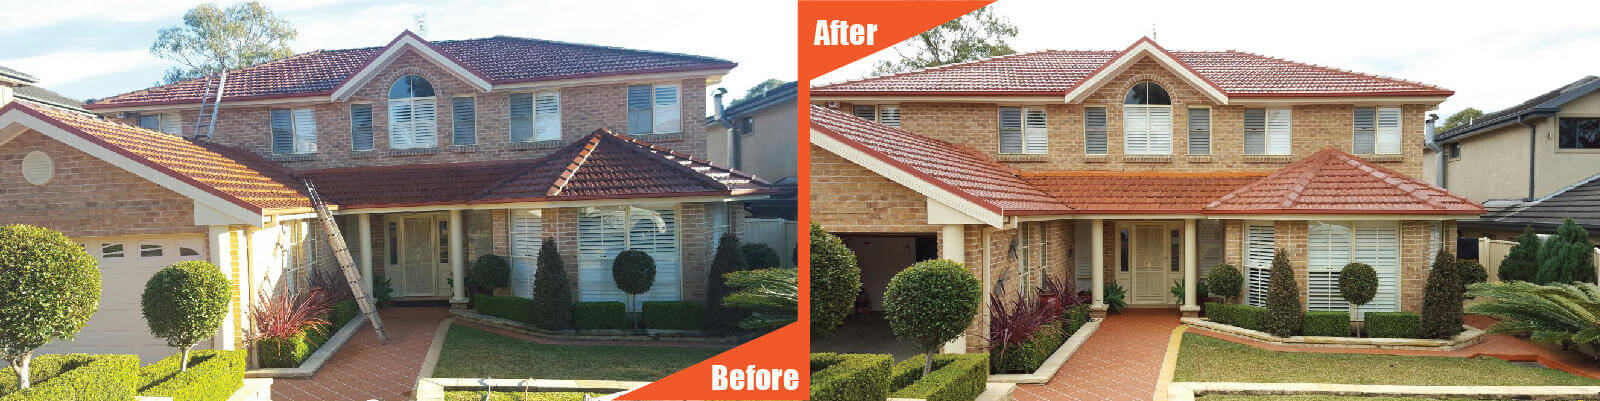 roof cleaning services before and after